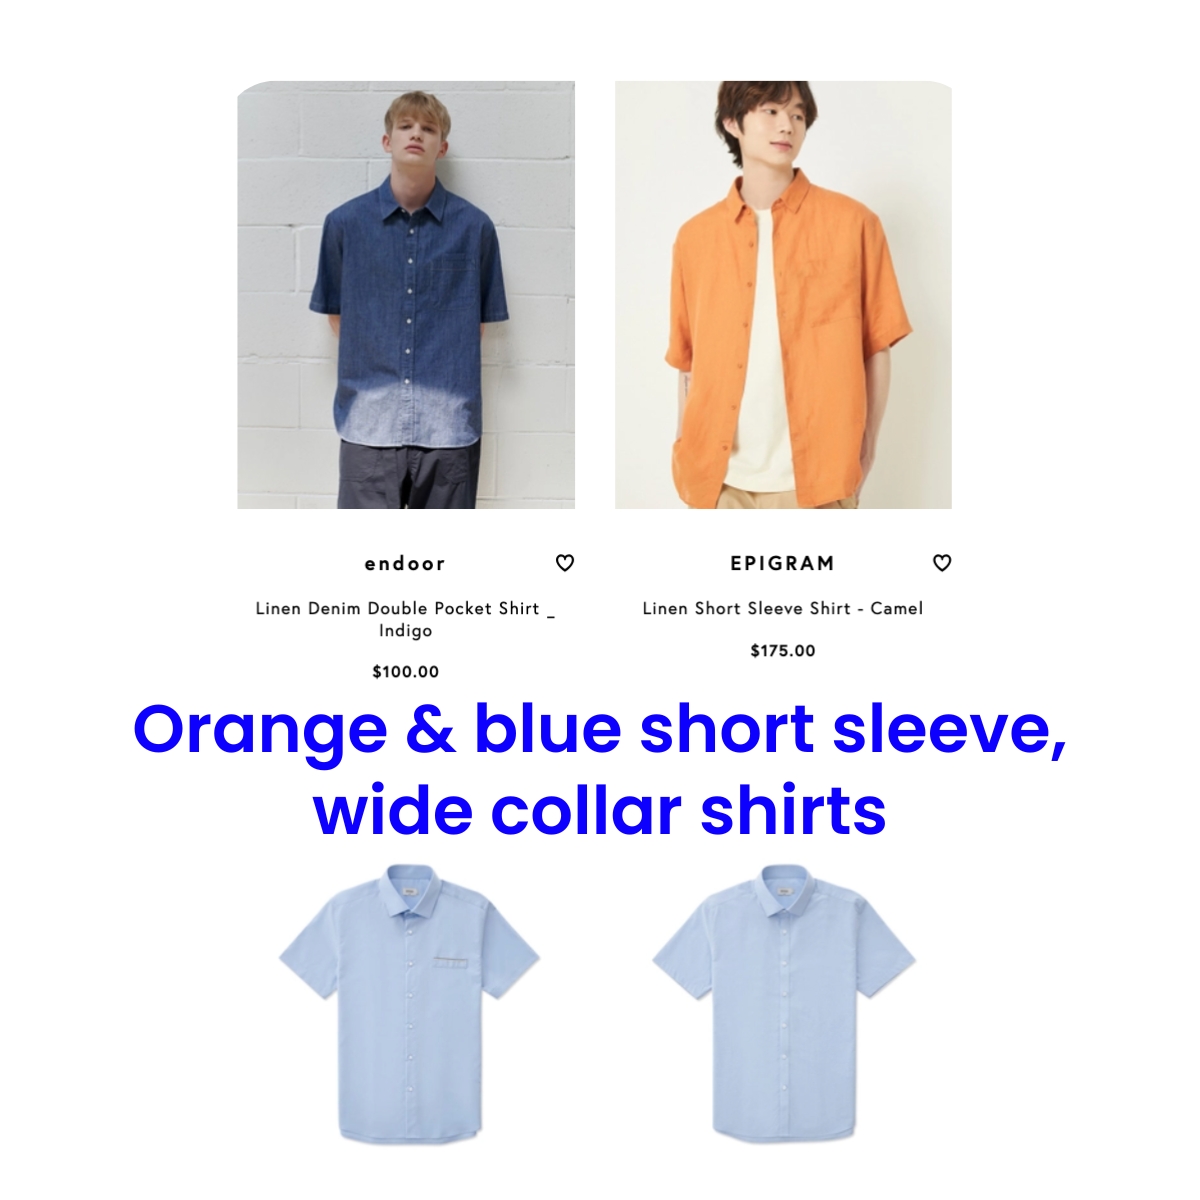 Orange and blue, wide collar, short sleeve shirts using AI filtering